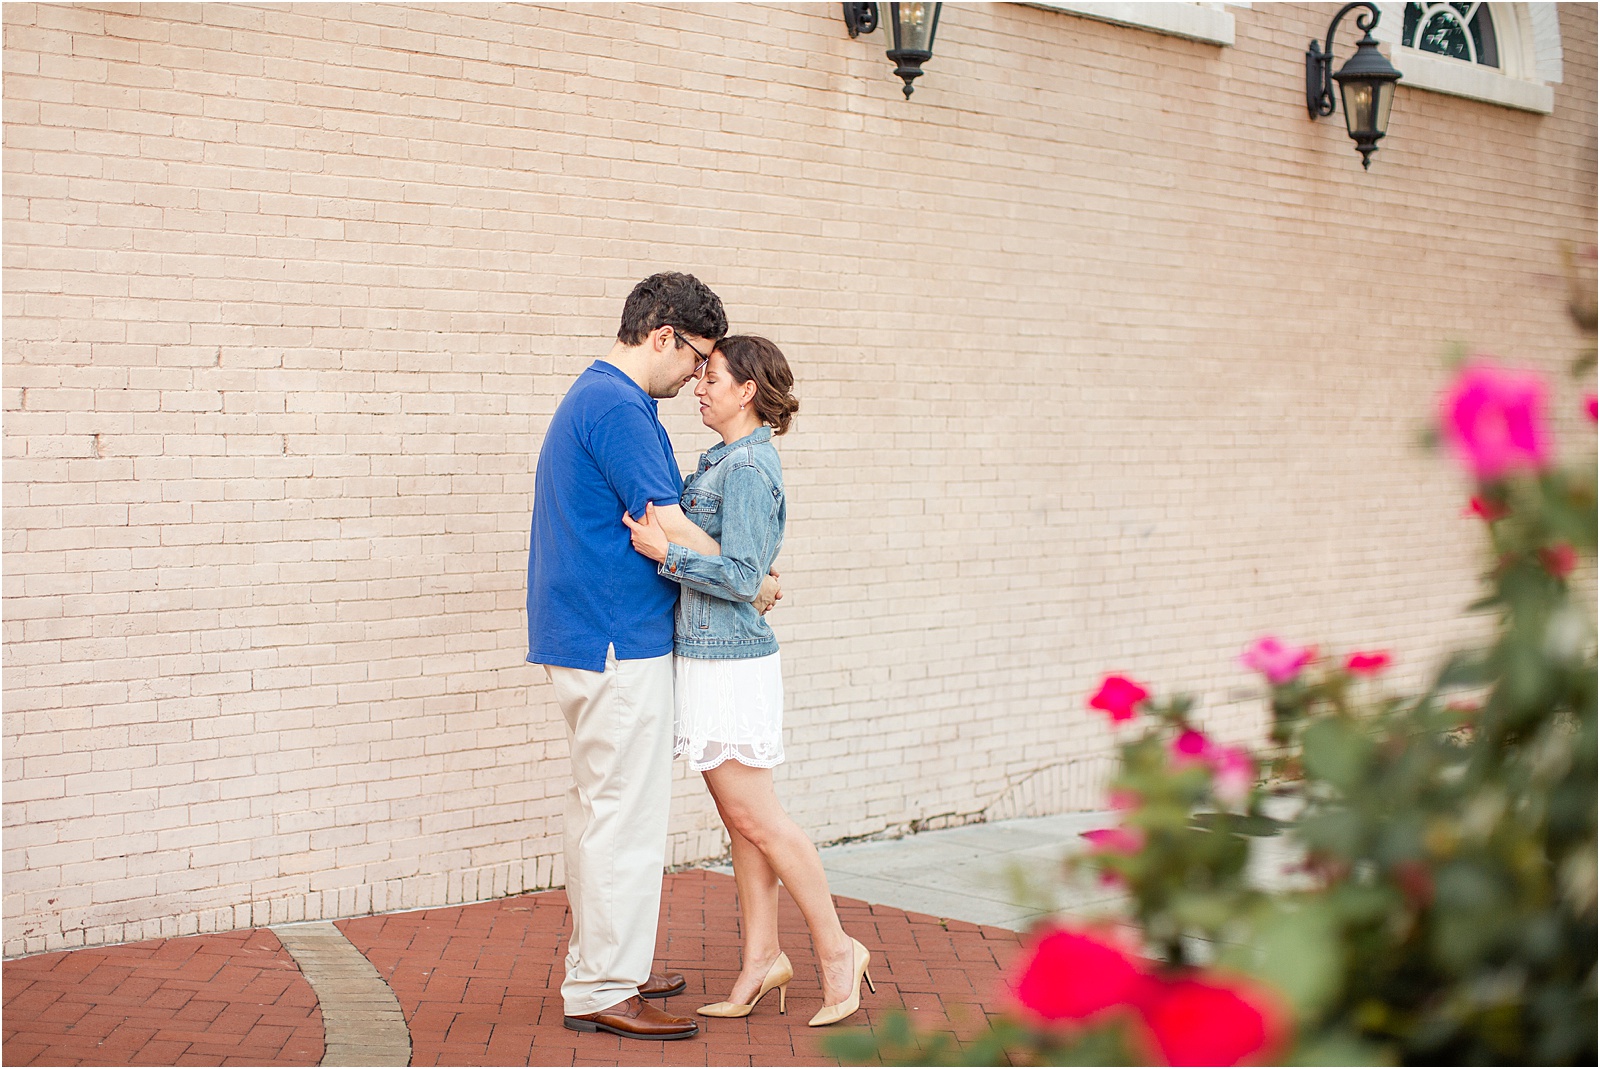 Engagement pictures in front of historic Anderson buidling